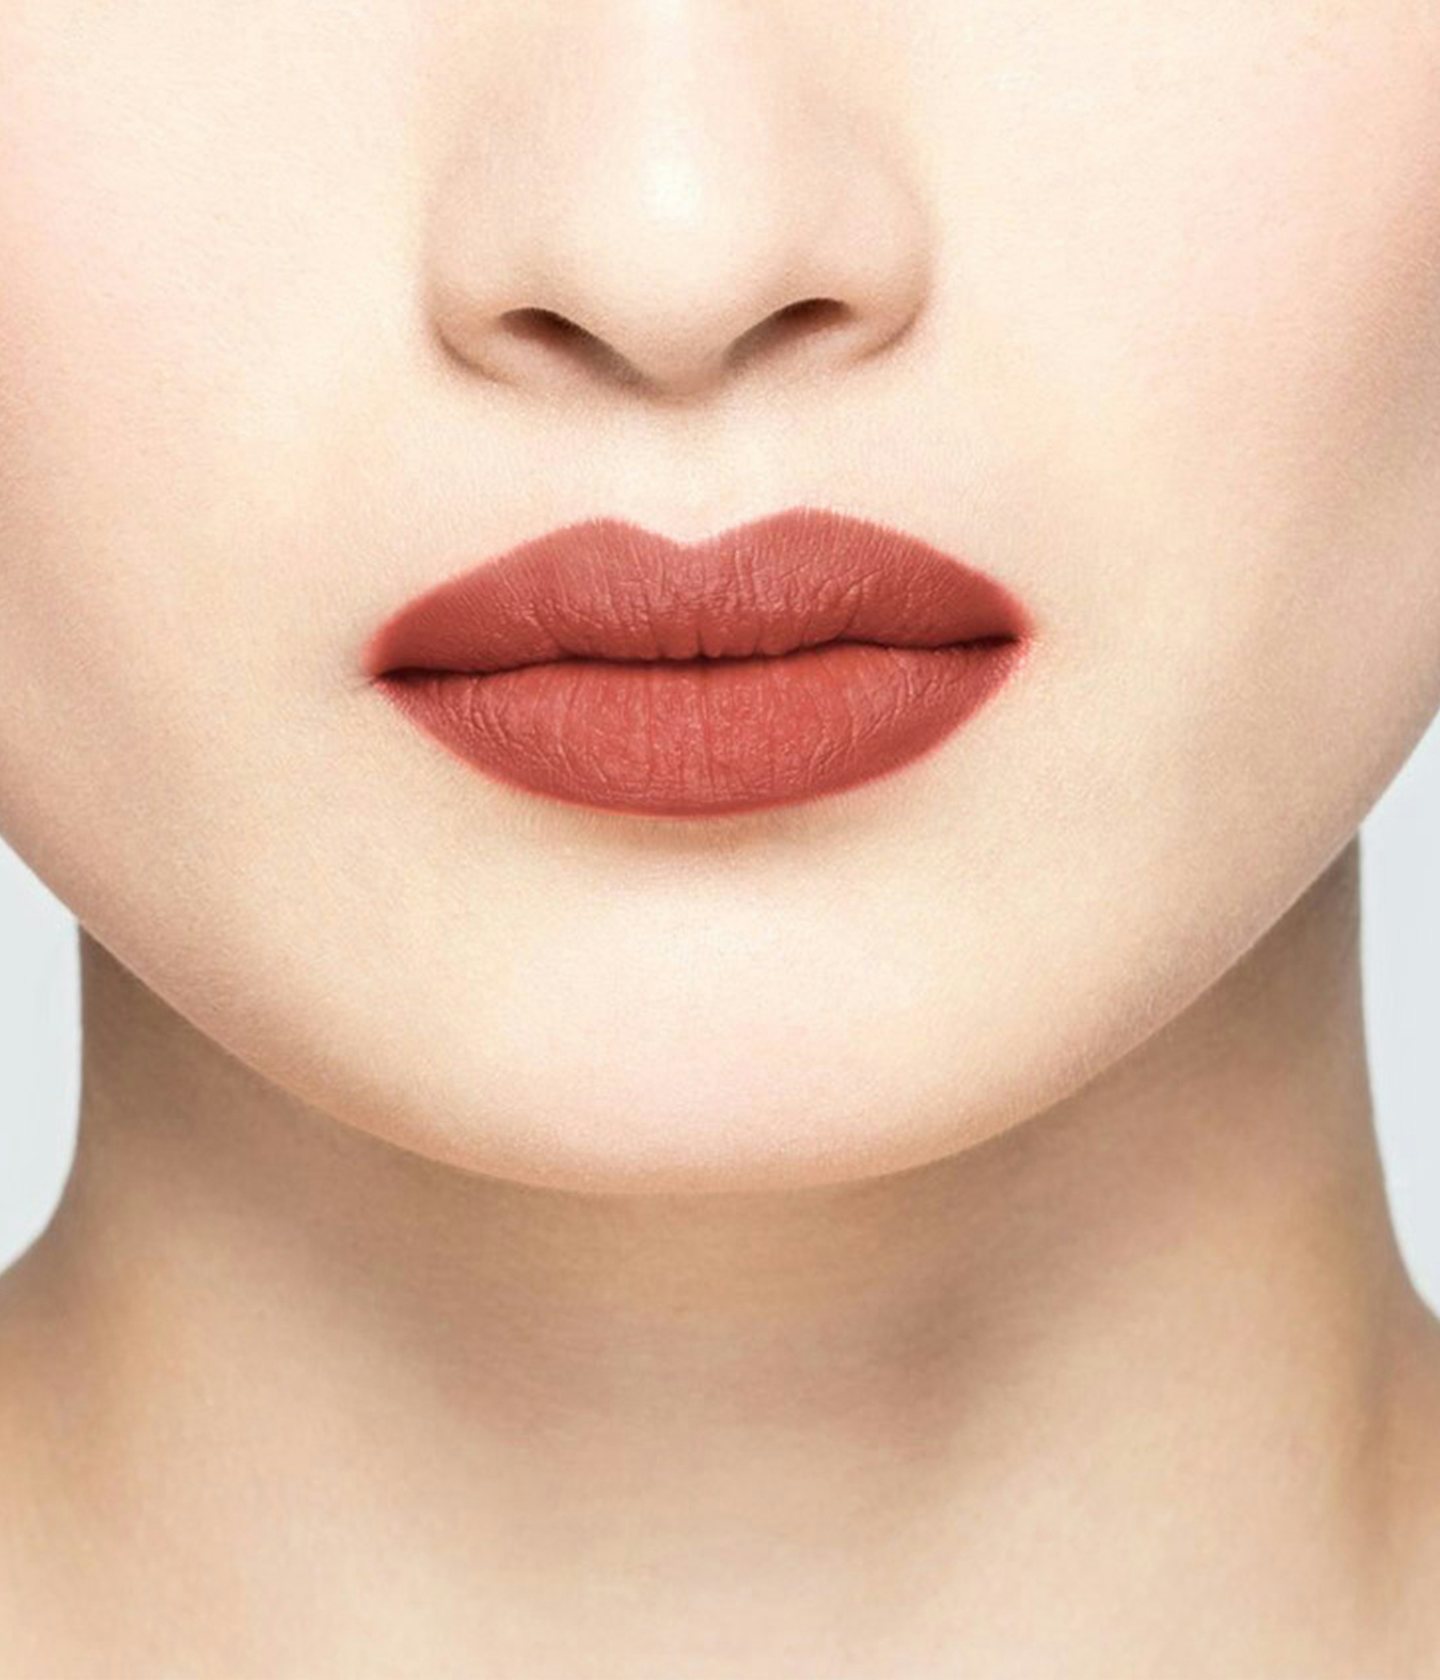 La bouche rouge Chestnut lipstick shade on the lips of an Asian model